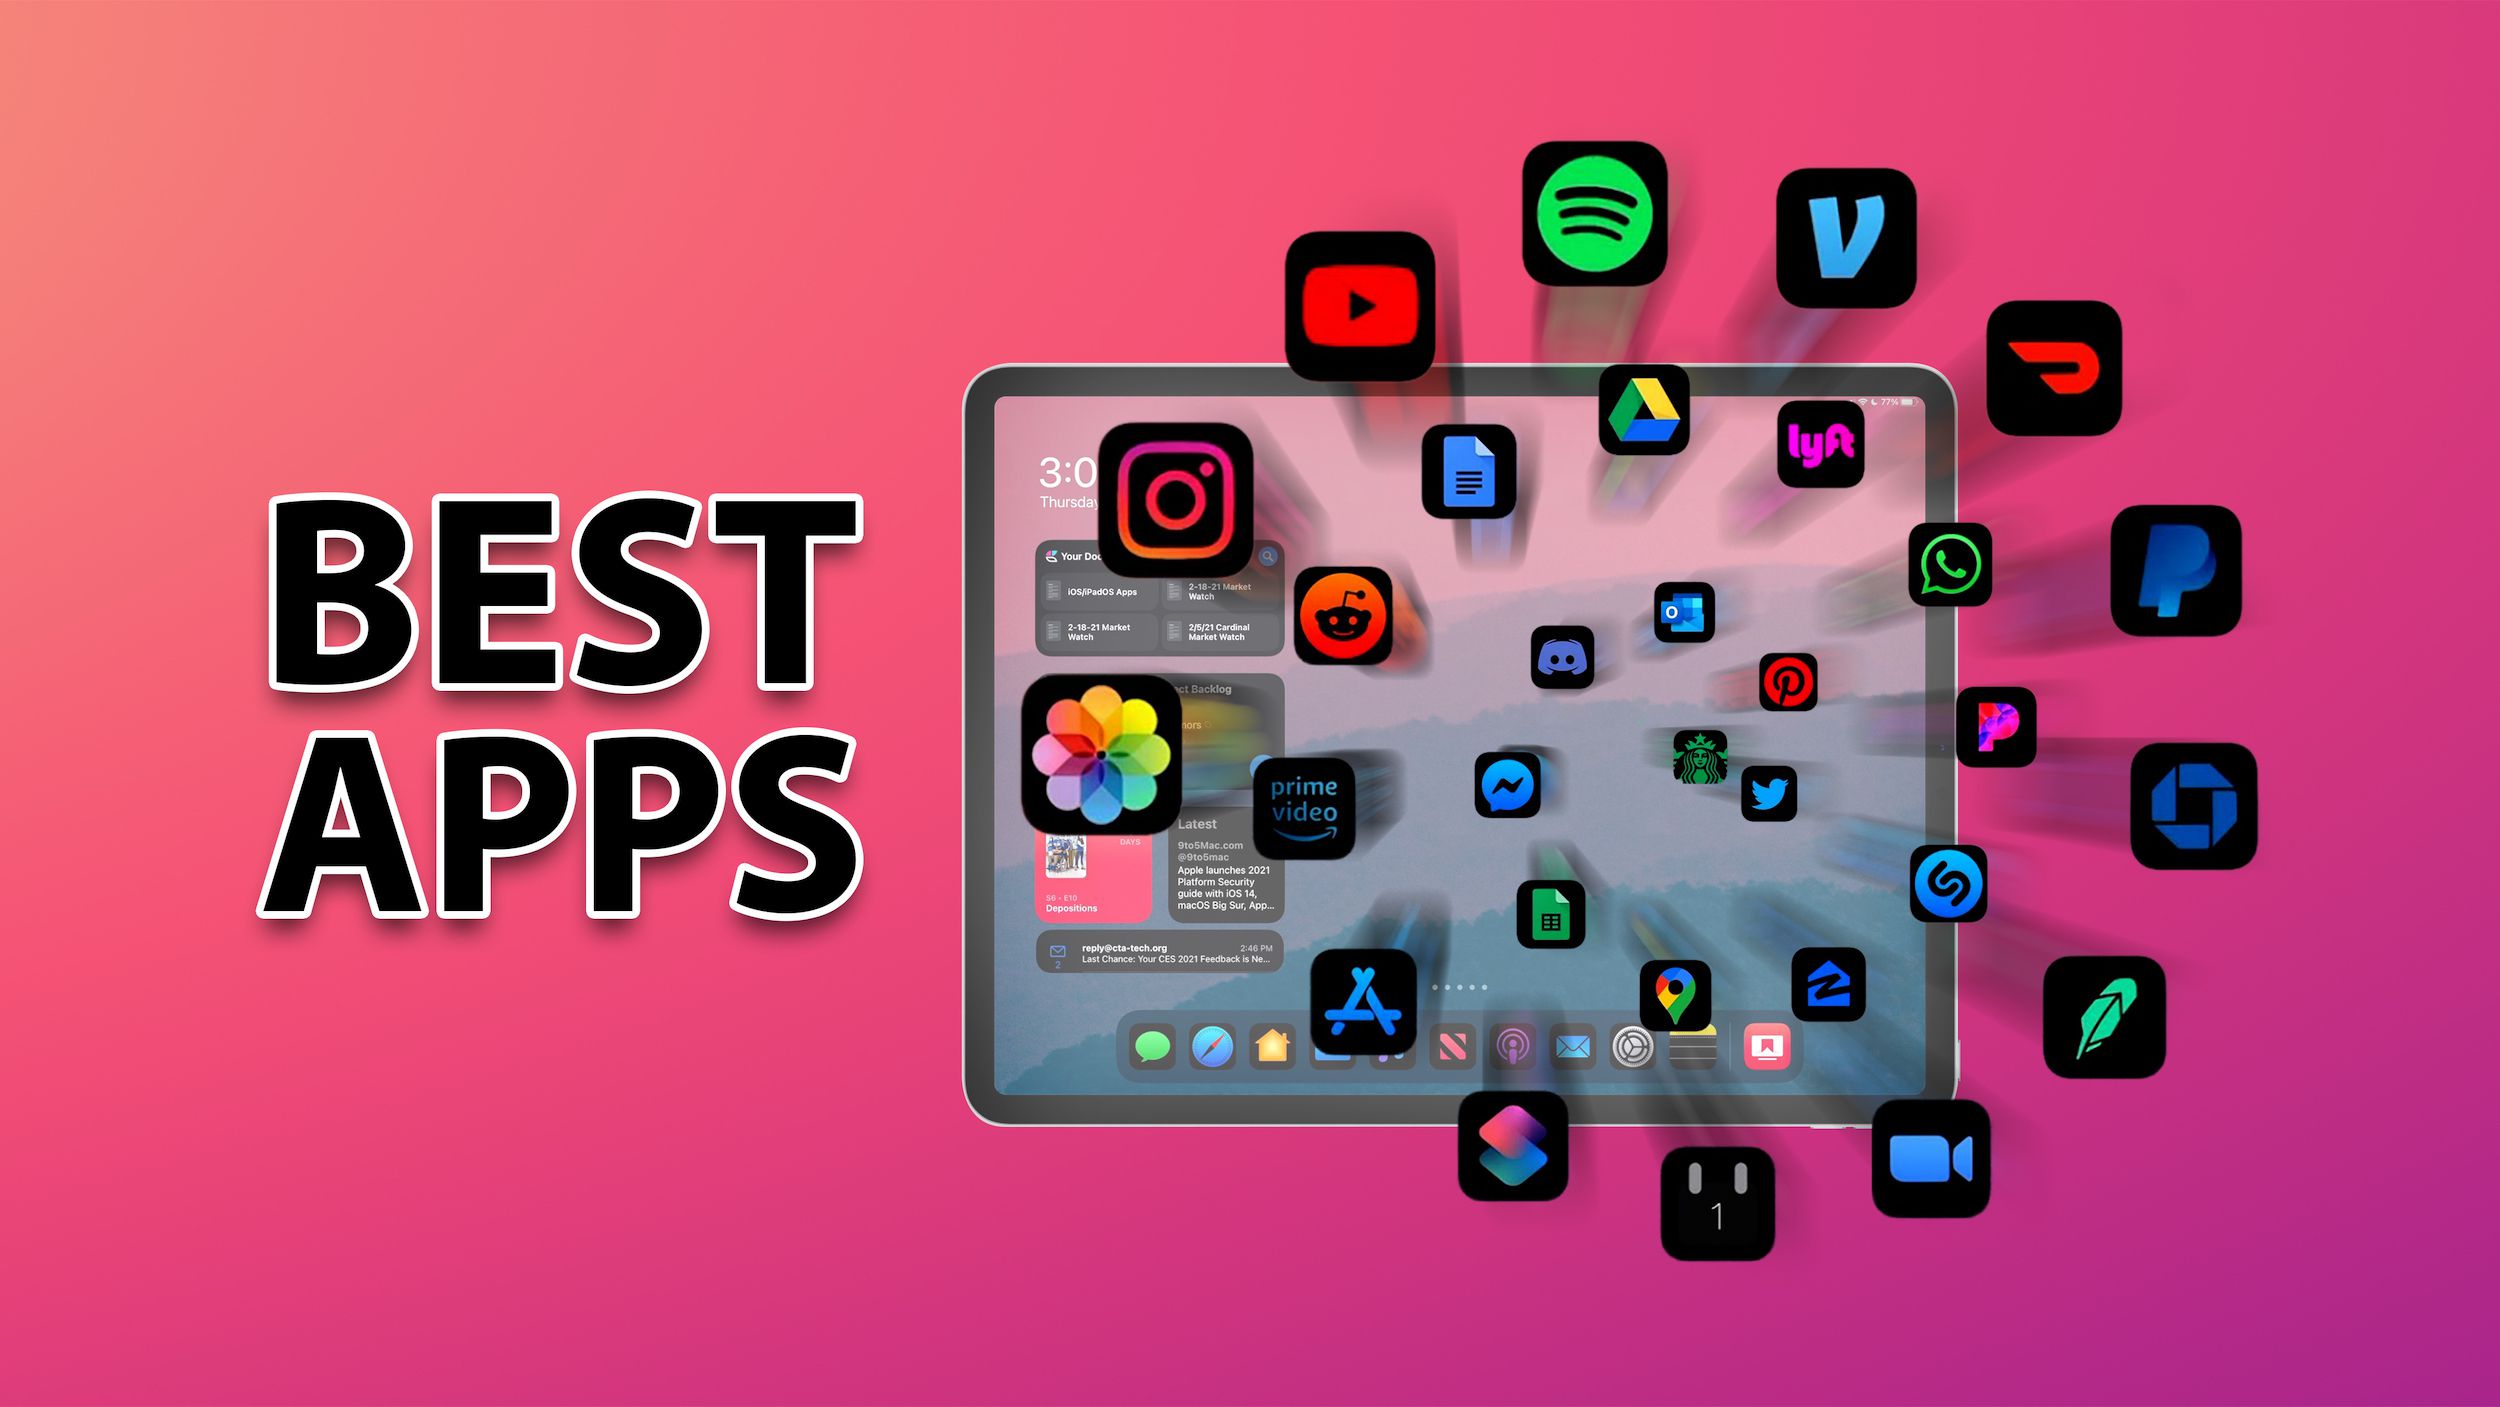 iOS and iPadOS Apps Worth Checking Out - February 2021 - Mac Rumors